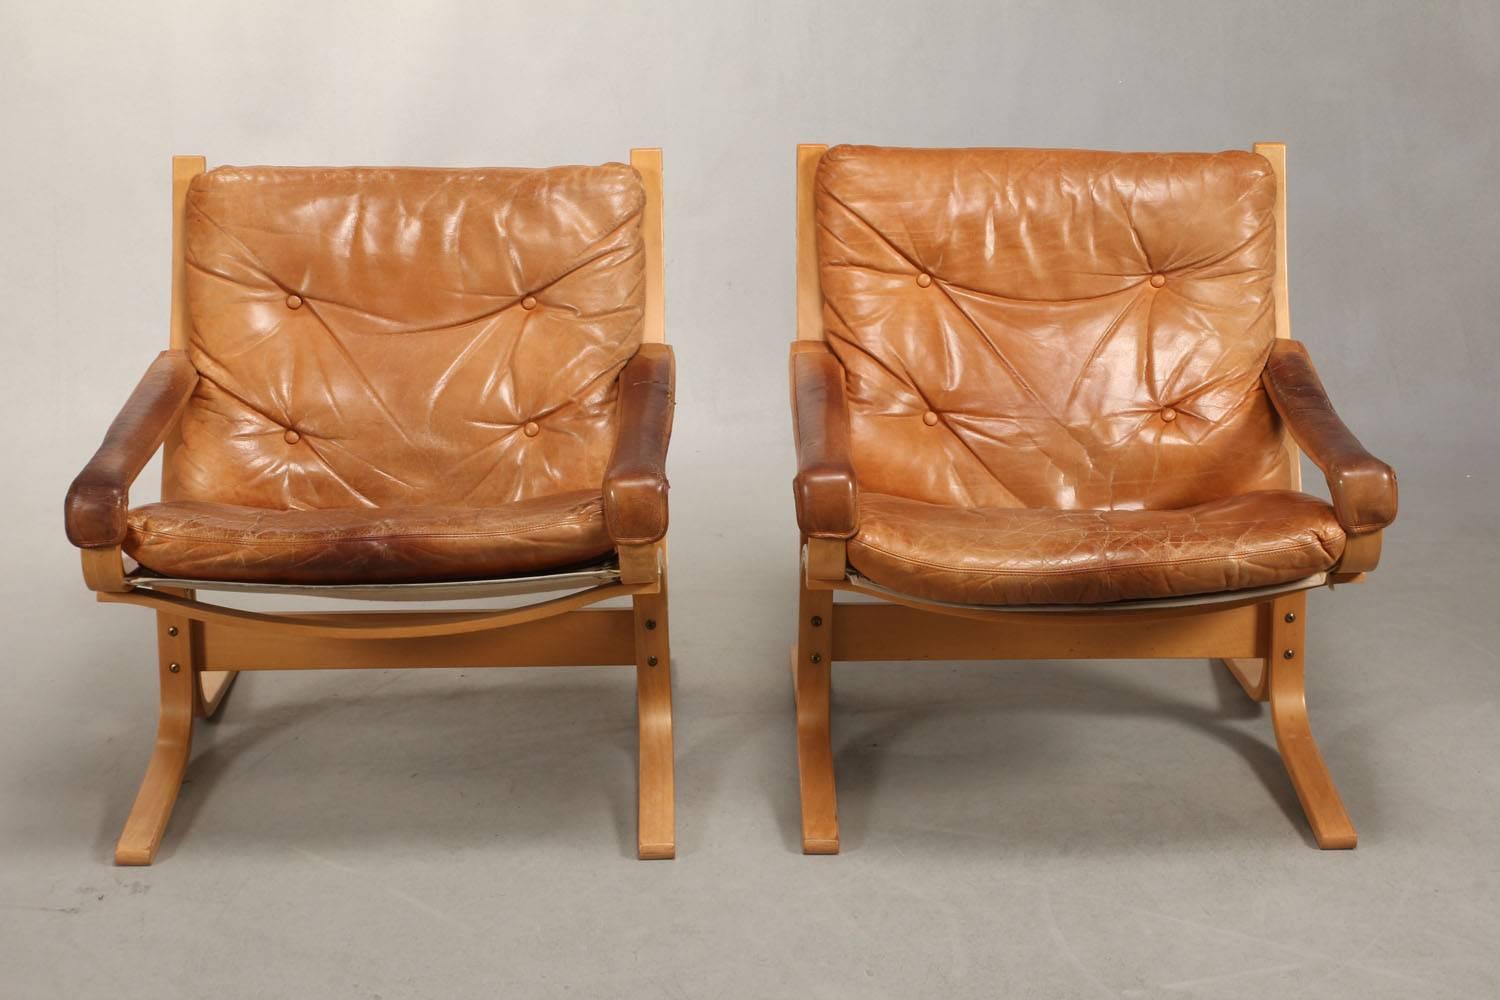 Pair of Leather Siesta lounge chairs designed by Ingmar Relling for Norwegian West Nova. Nice heavily patient leather. Light bended wood and nice patinaed leather cushions and arm straps. Also available in grey, please call for information.